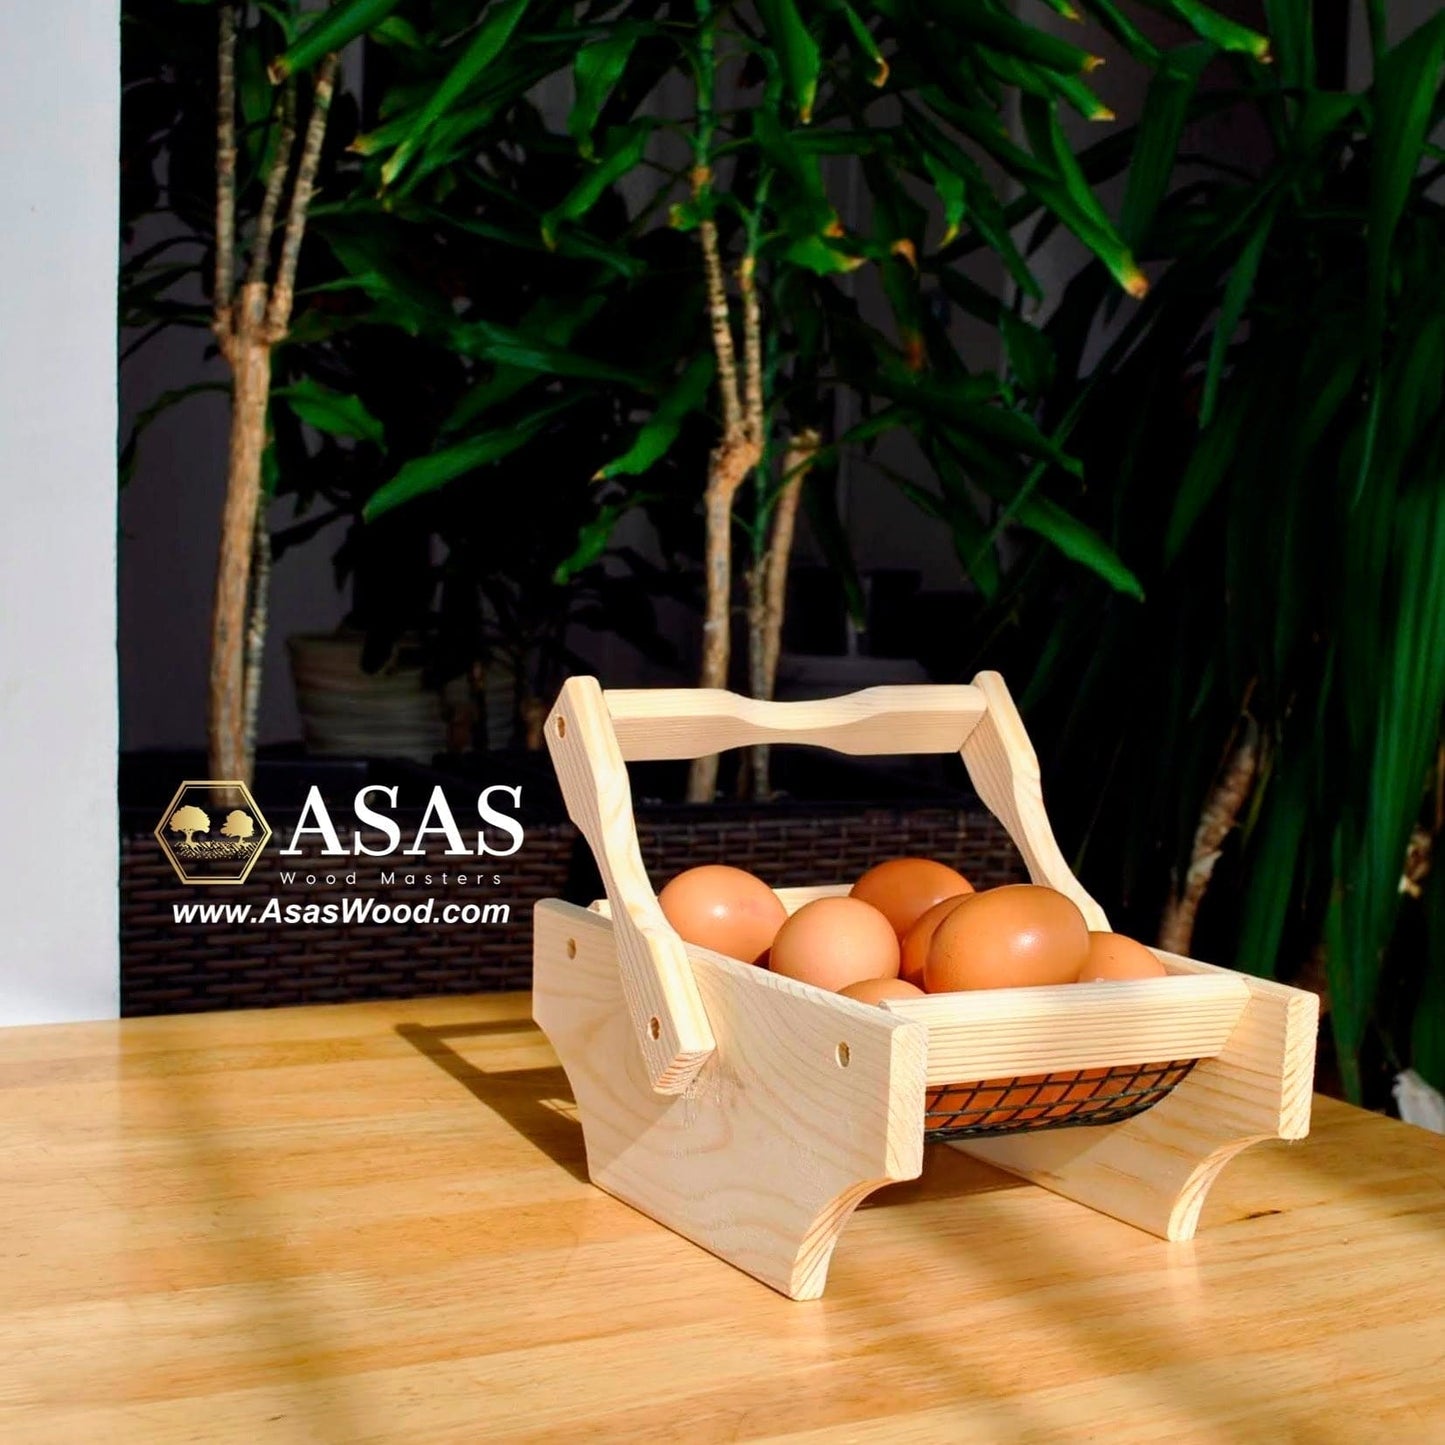 Egg basket, cool, handmade, wooden, made by asaswood